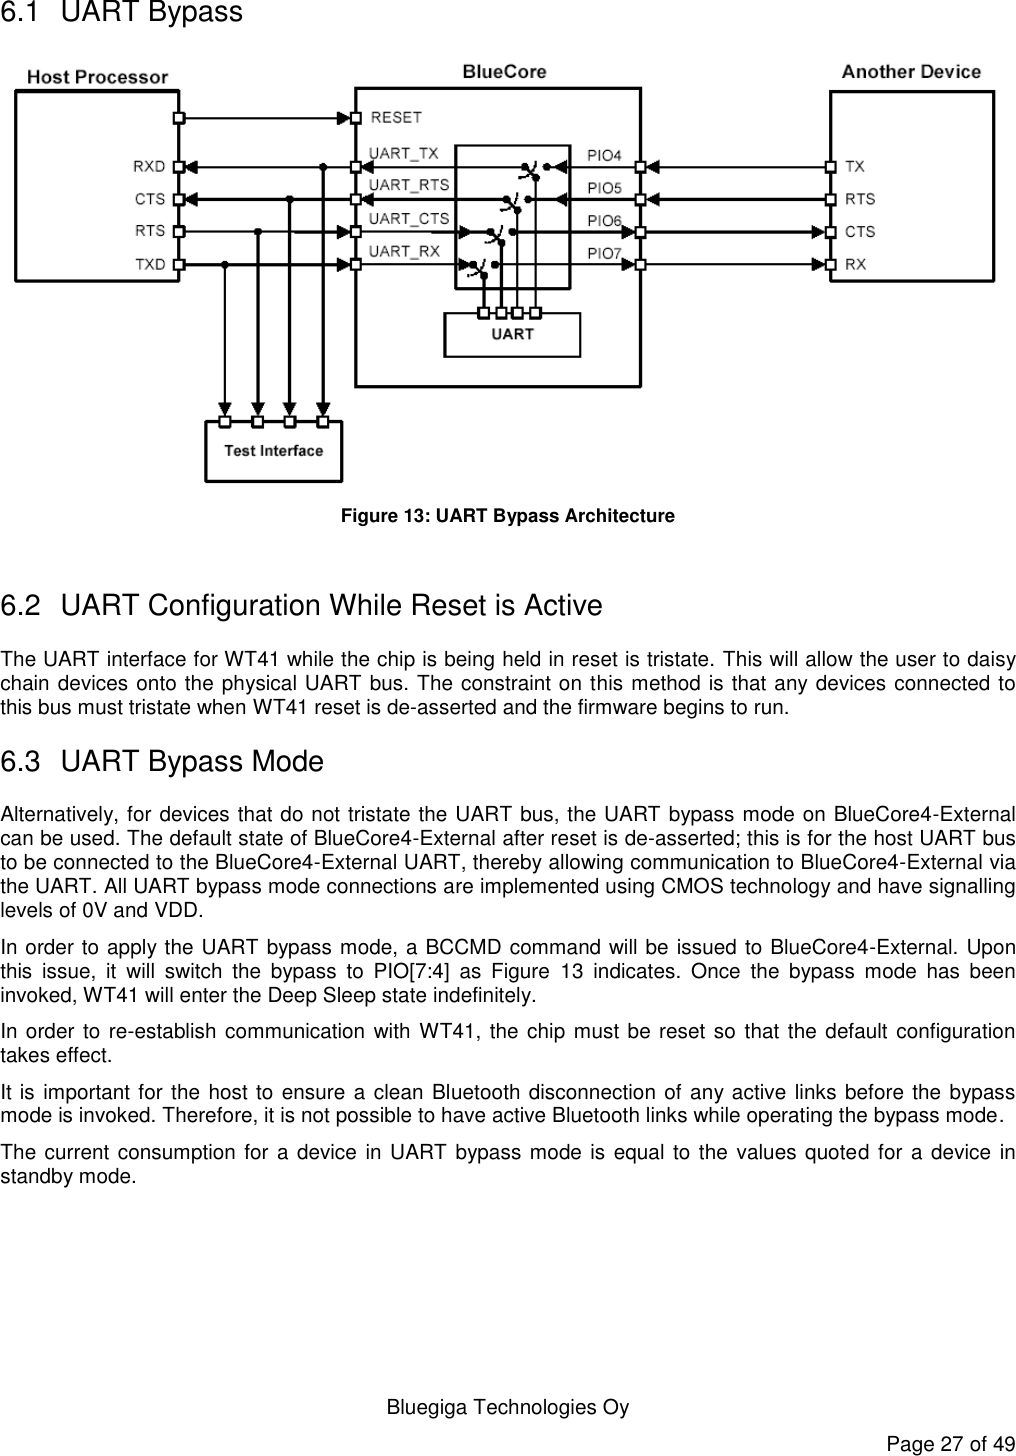   Bluegiga Technologies Oy Page 27 of 49 6.1  UART Bypass  Figure 13: UART Bypass Architecture  6.2  UART Configuration While Reset is Active The UART interface for WT41 while the chip is being held in reset is tristate. This will allow the user to daisy chain devices onto the physical UART bus. The constraint on this method is that any devices connected to this bus must tristate when WT41 reset is de-asserted and the firmware begins to run. 6.3  UART Bypass Mode Alternatively, for devices that do not tristate the UART bus, the UART bypass mode on BlueCore4-External can be used. The default state of BlueCore4-External after reset is de-asserted; this is for the host UART bus to be connected to the BlueCore4-External UART, thereby allowing communication to BlueCore4-External via the UART. All UART bypass mode connections are implemented using CMOS technology and have signalling levels of 0V and VDD. In order to apply the UART bypass mode, a BCCMD command will be issued to BlueCore4-External. Upon this  issue,  it  will  switch  the  bypass  to  PIO[7:4]  as  Figure  13  indicates.  Once  the  bypass  mode  has  been invoked, WT41 will enter the Deep Sleep state indefinitely. In order to re-establish communication with WT41, the chip must be reset so that the default configuration takes effect. It is important for the host to ensure a clean Bluetooth disconnection of any active links before the bypass mode is invoked. Therefore, it is not possible to have active Bluetooth links while operating the bypass mode. The current consumption for a device in UART bypass mode is equal to the  values quoted for a device in standby mode. 